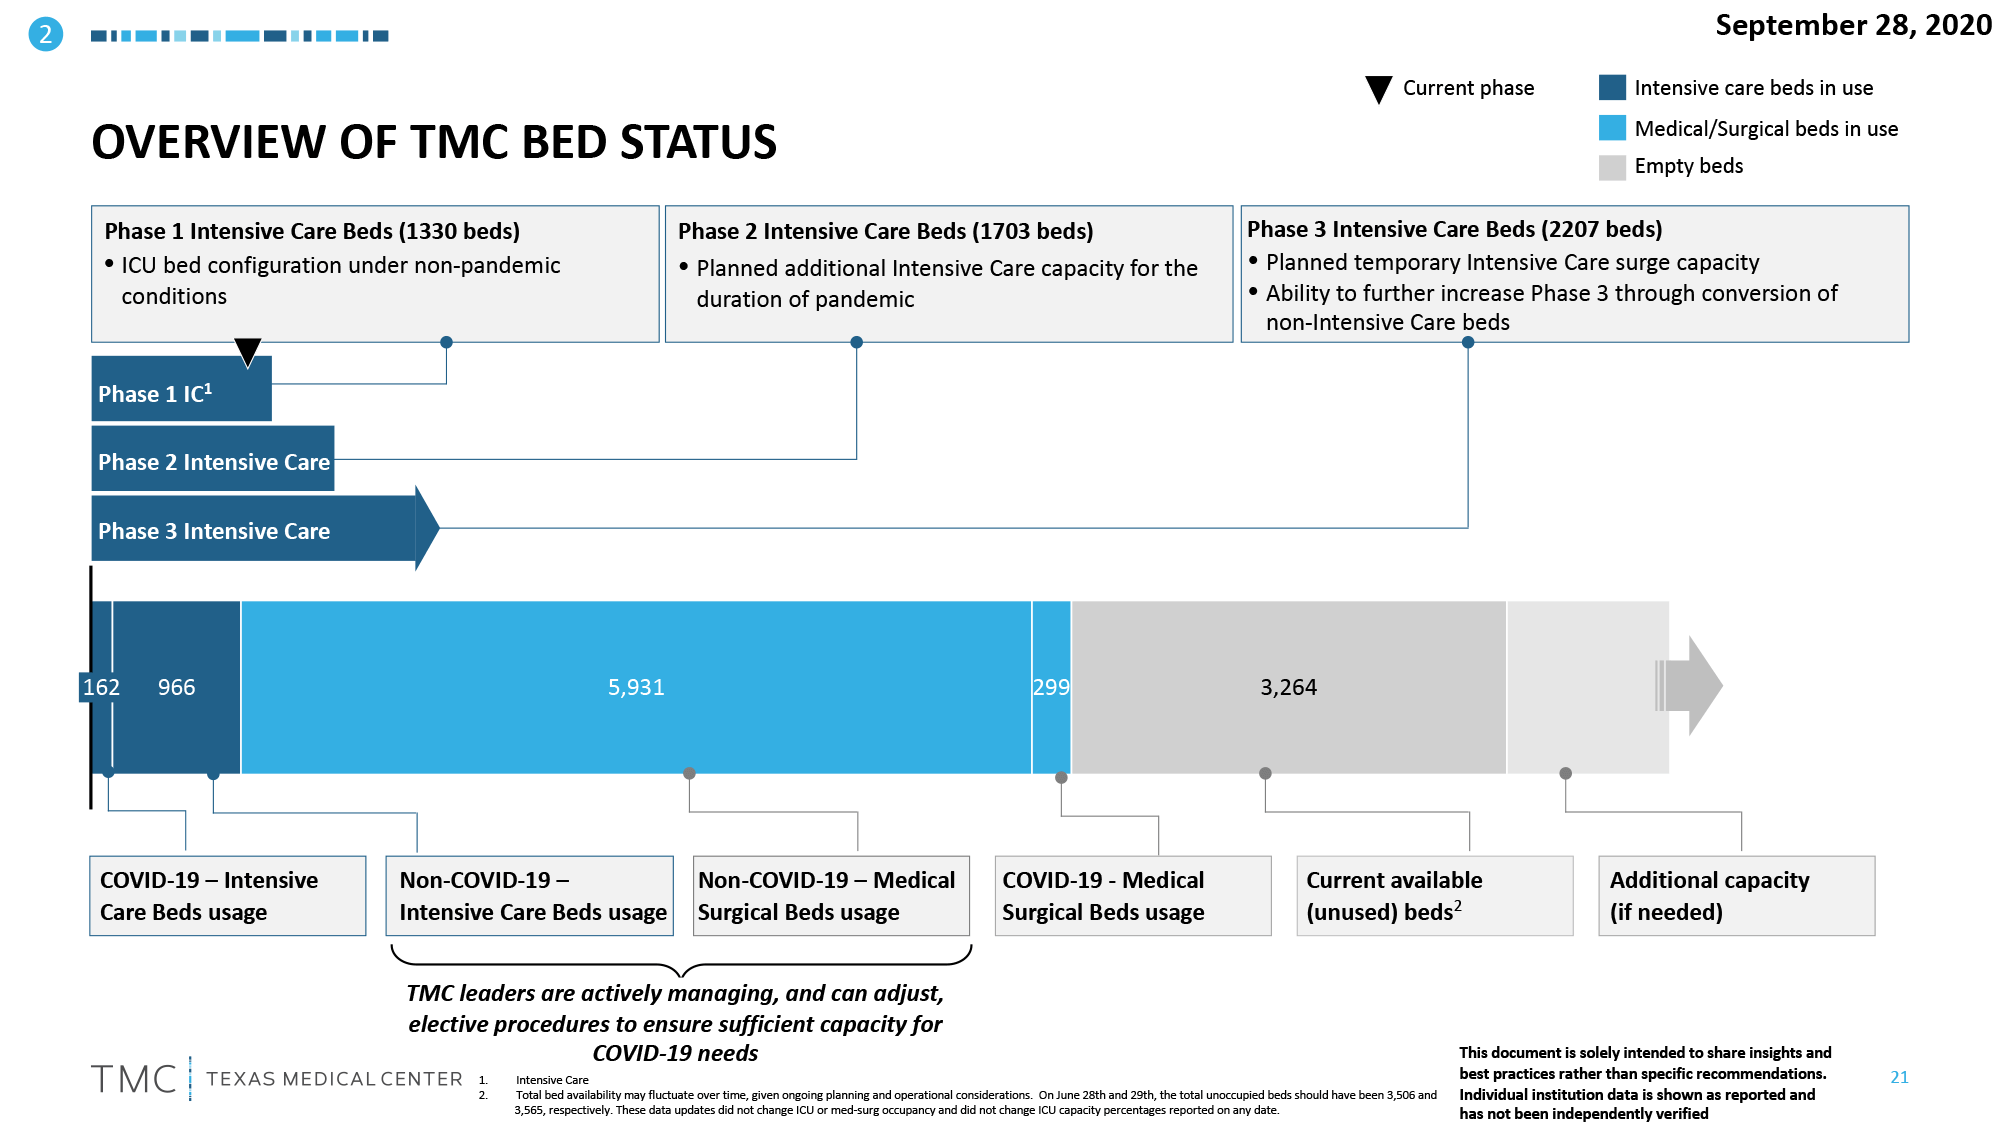 k-Overview-Of-TMC-Bed-Status-9-29-2020.png